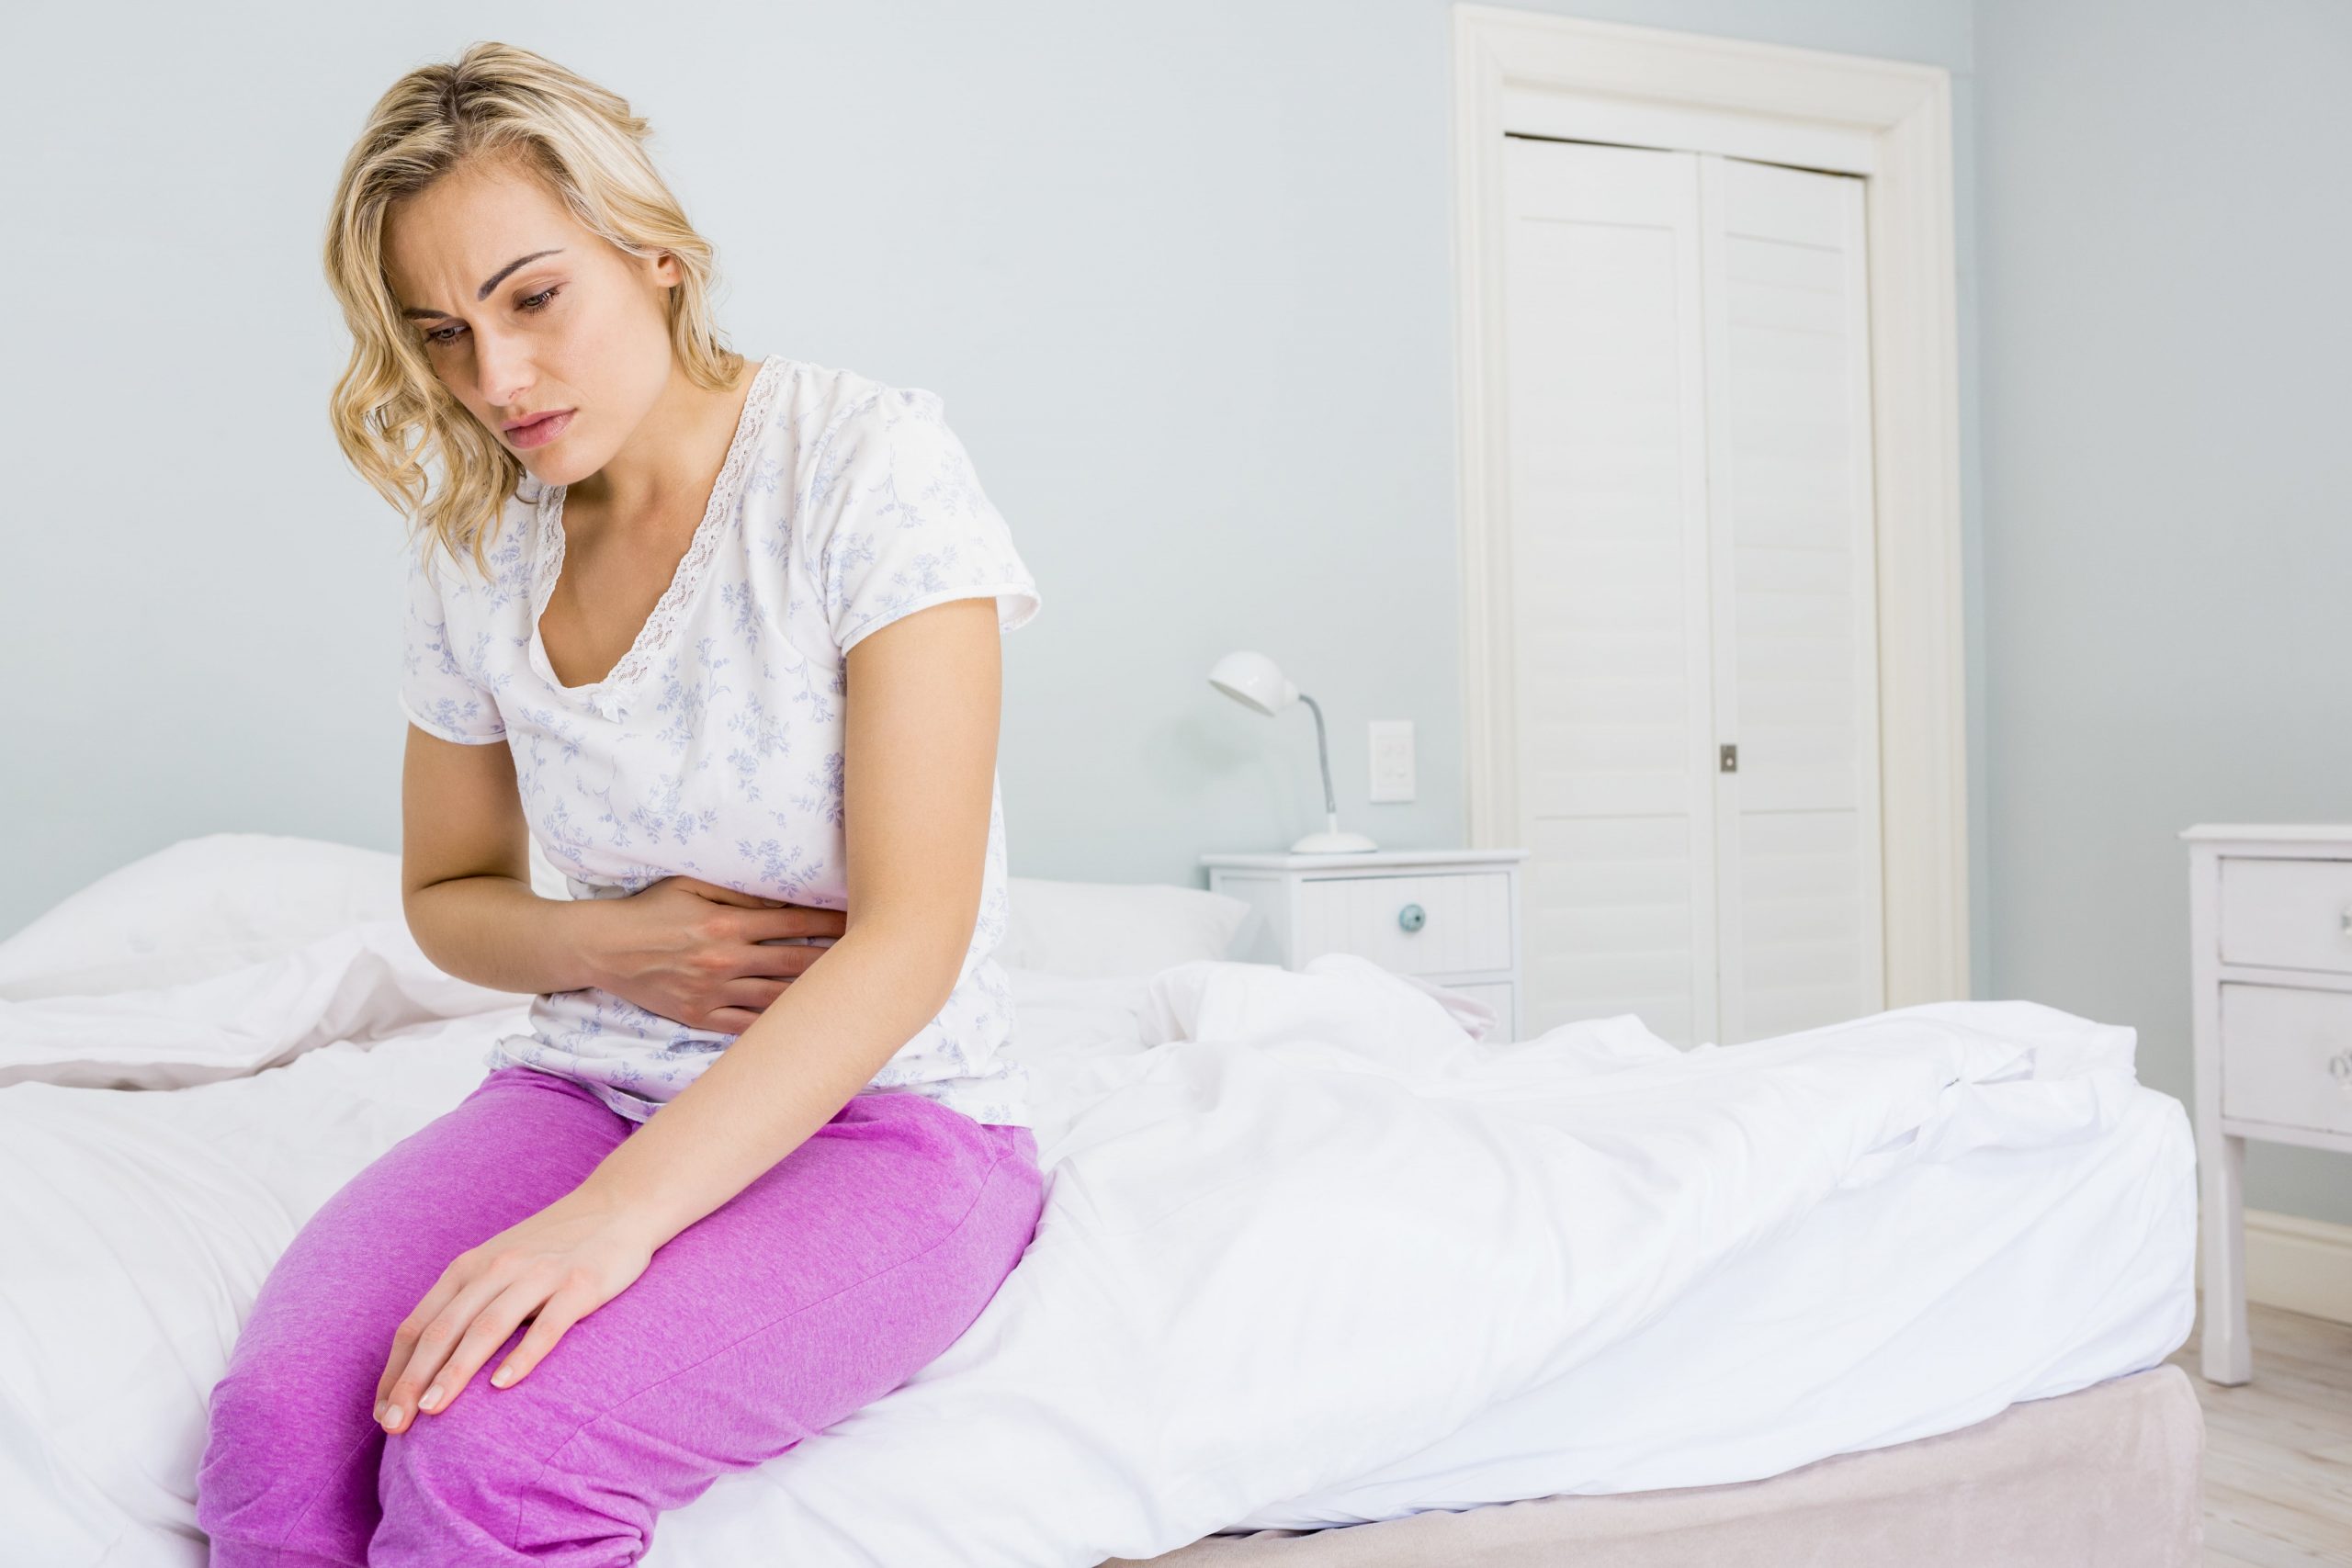 Stomach Flu or Food Poisoning? Here Are The Facts All Things Health